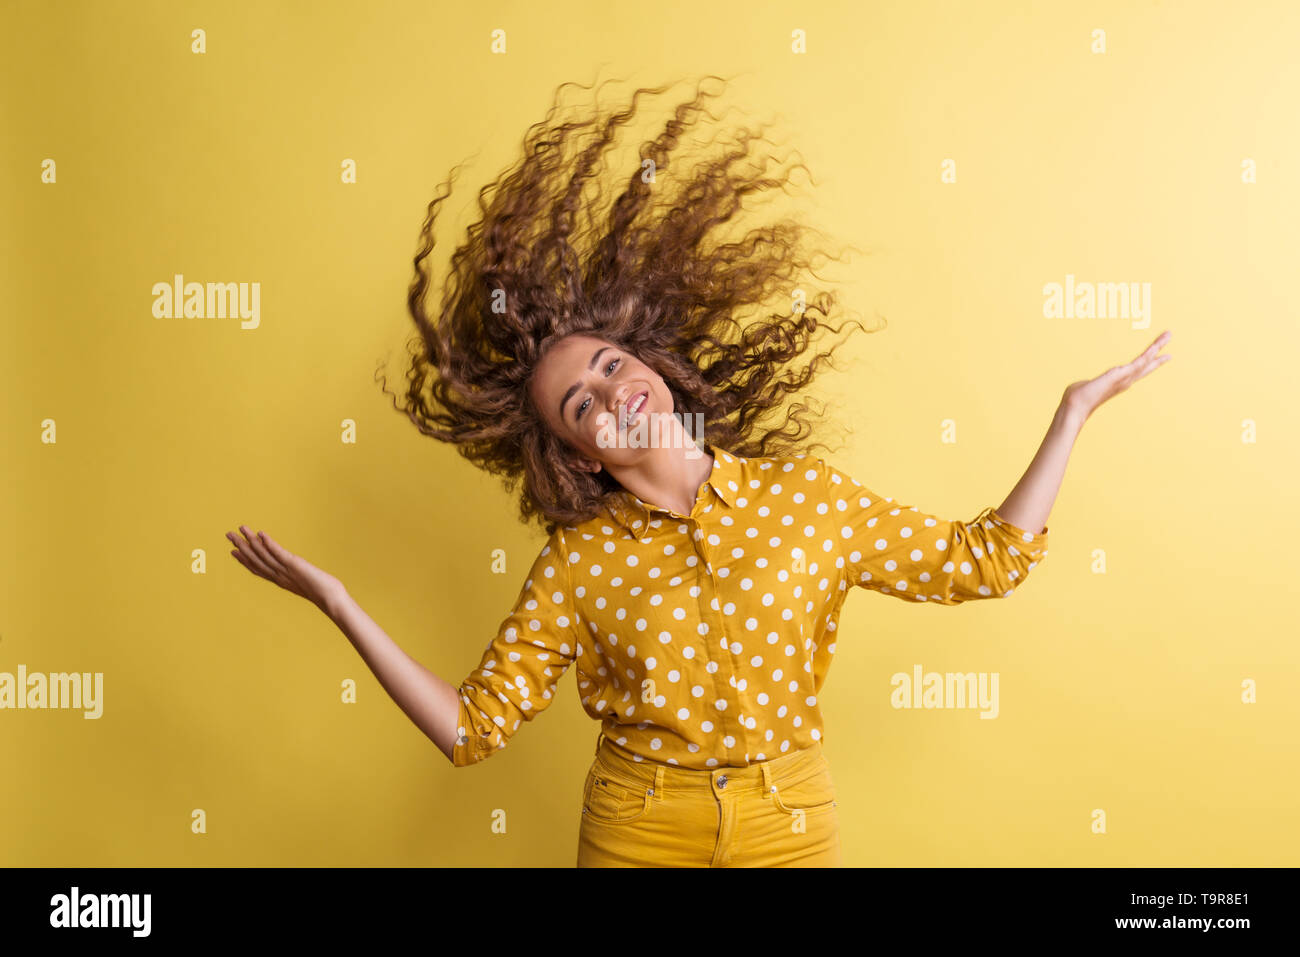 Portrait of a young woman in a studio on a yellow background, having fun. Stock Photo